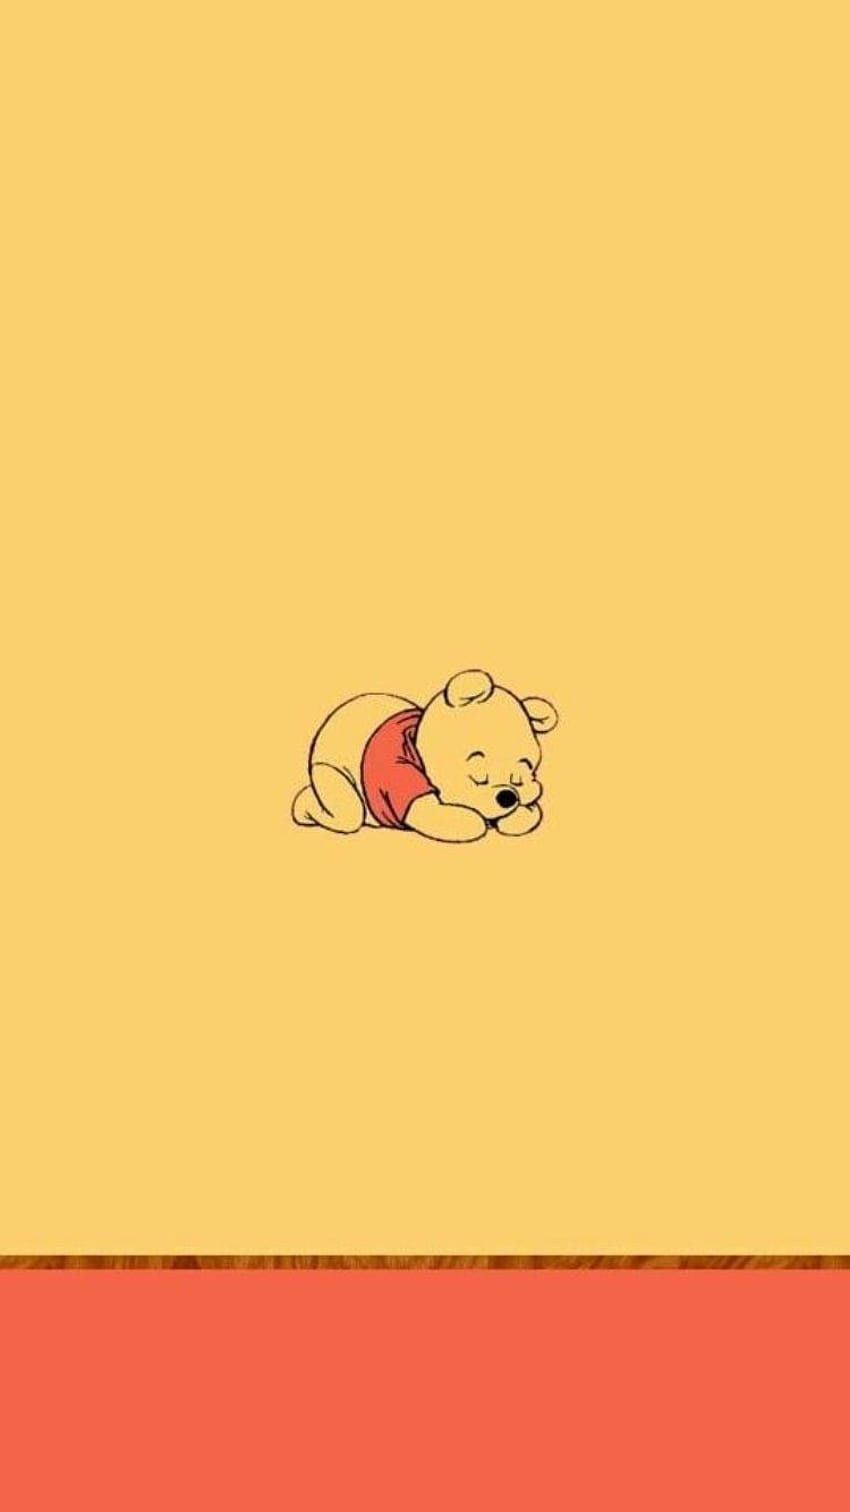 Sleeping Pooh Art On Honey Yellow Backgrounds In 2019 Cute for, winnie ...